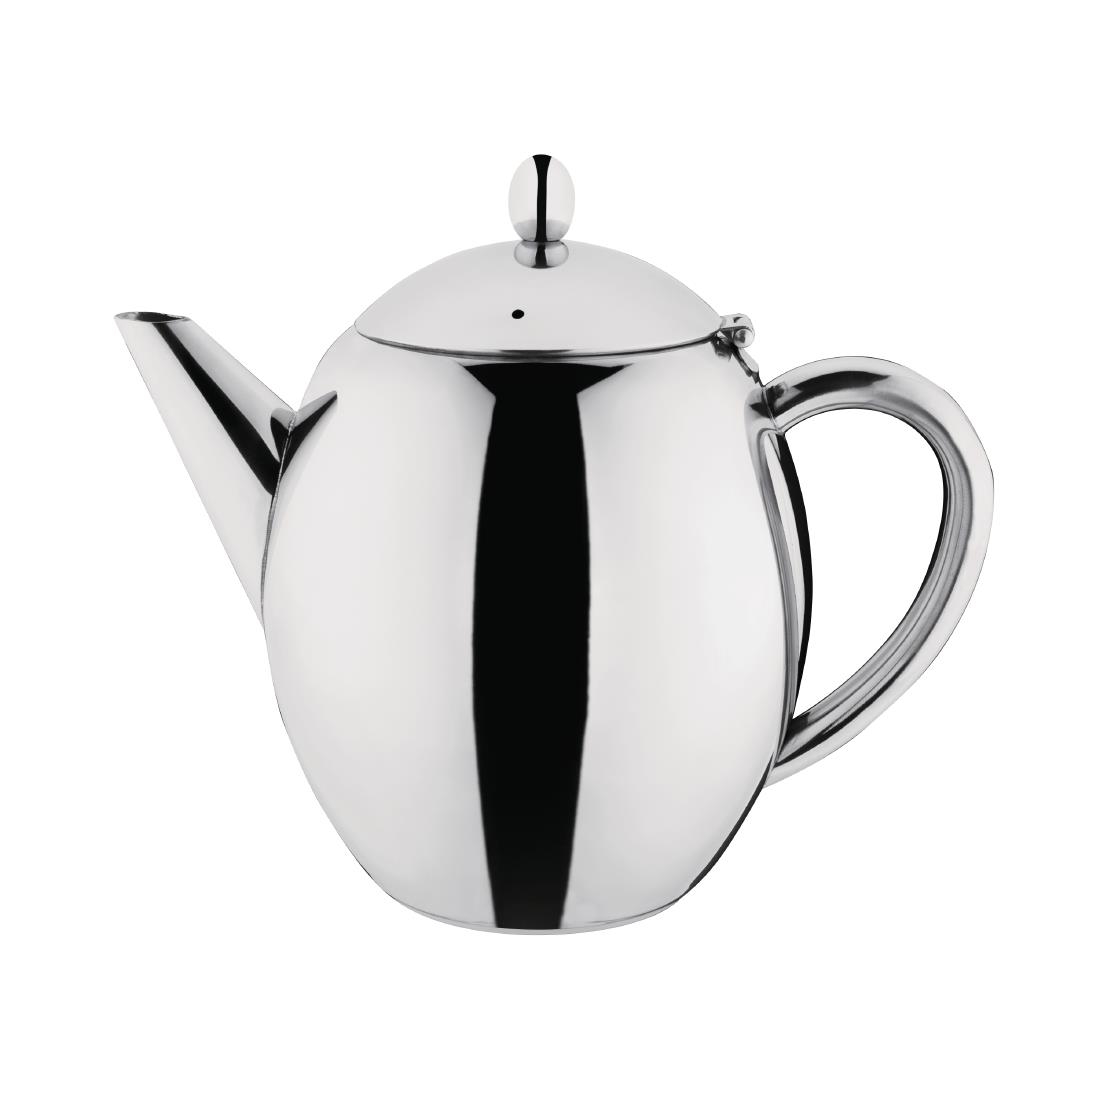 Olympia Richmond Stainless Steel Teapot 1.7Ltr/60oz